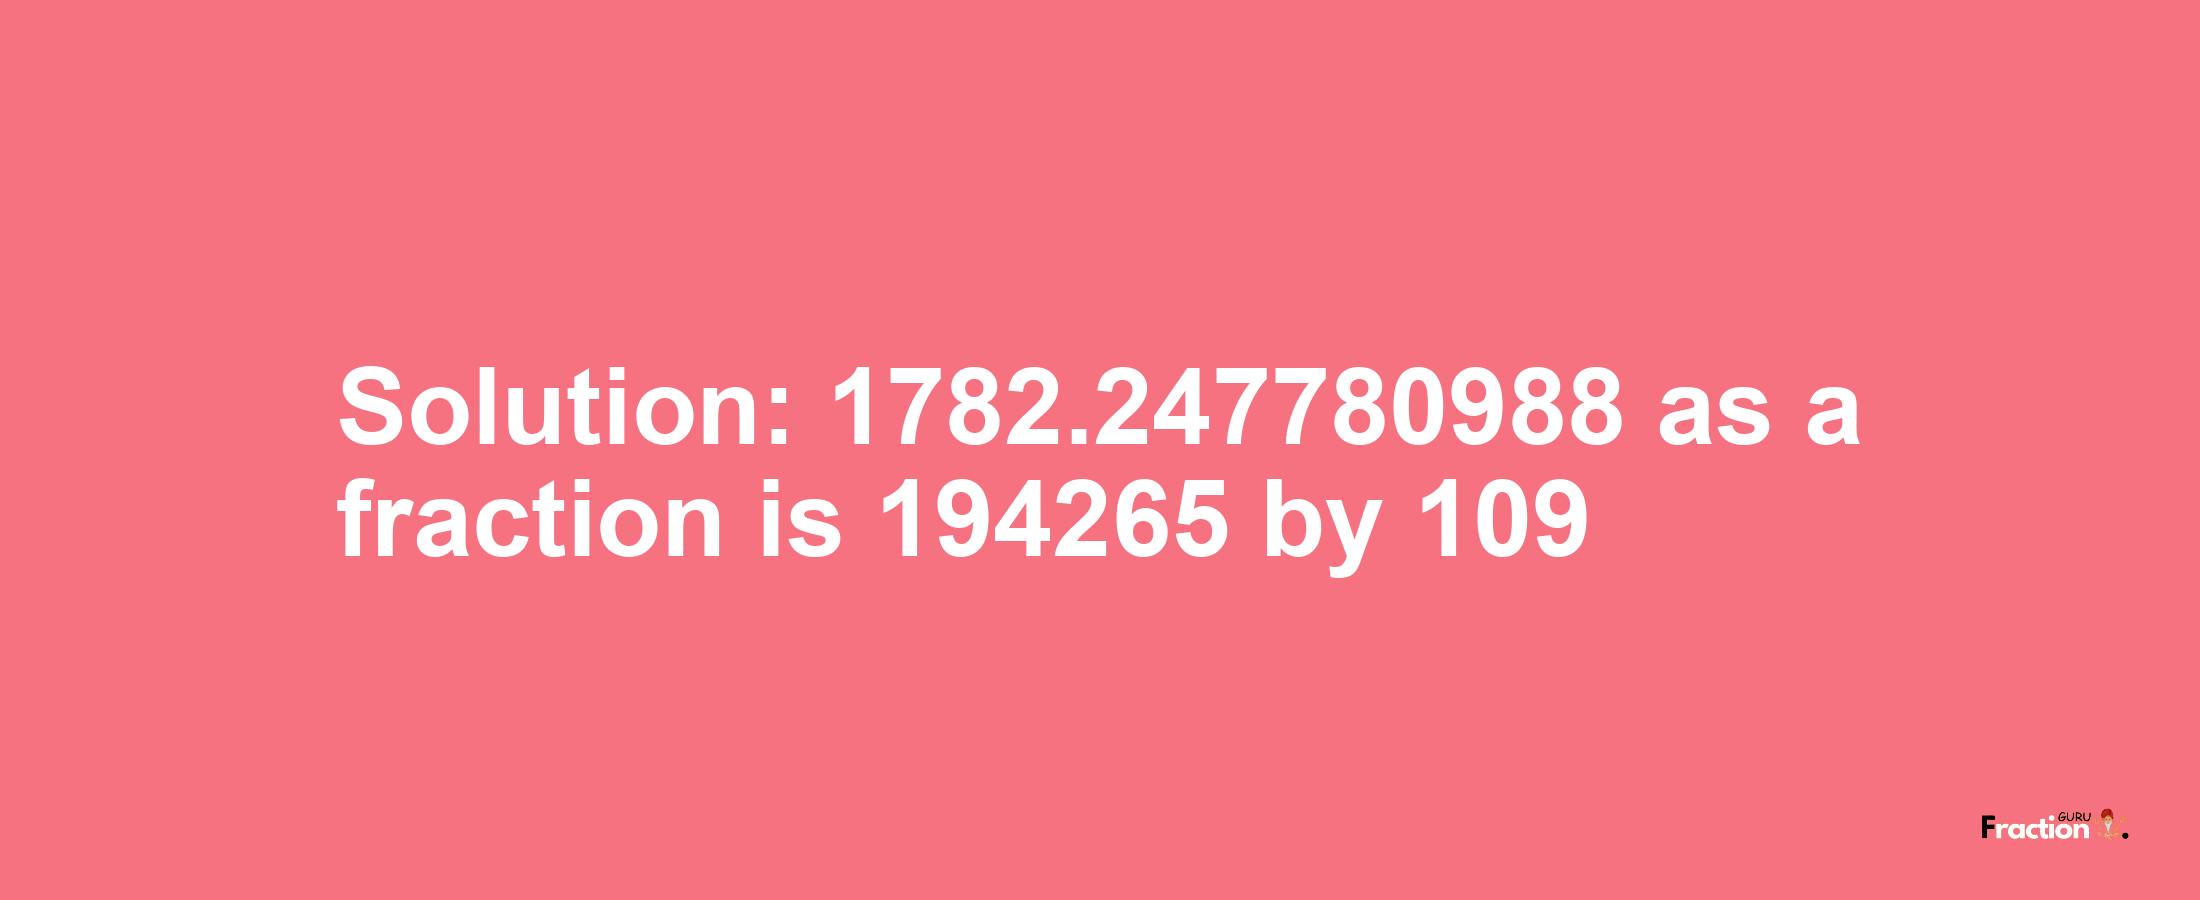 Solution:1782.247780988 as a fraction is 194265/109